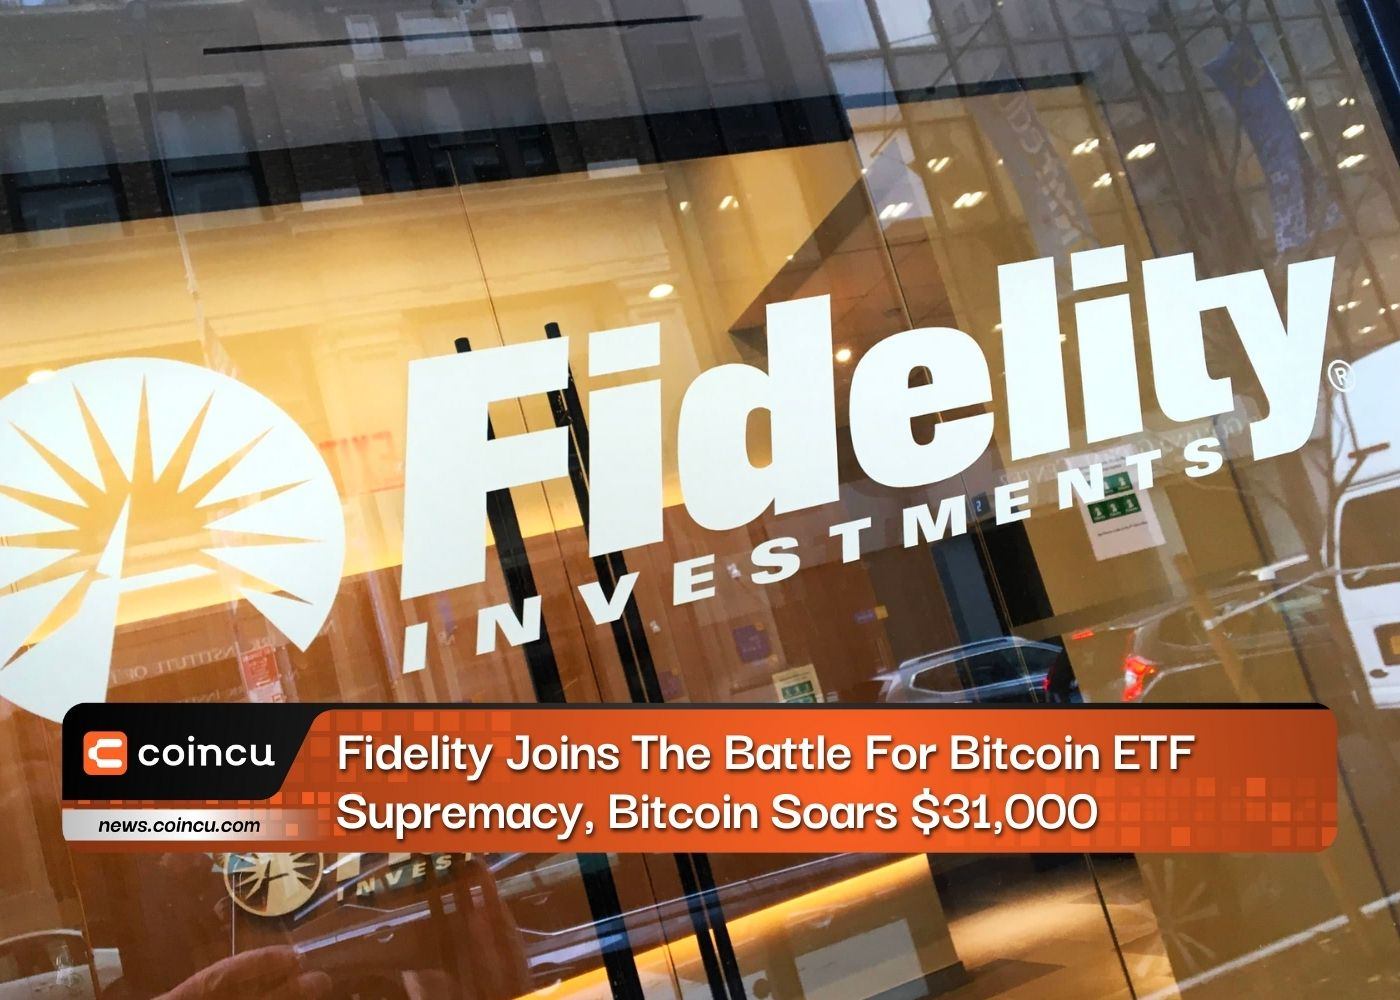 Fidelity Joins The Battle For Bitcoin ETF Supremacy, Bitcoin Soars $31,000